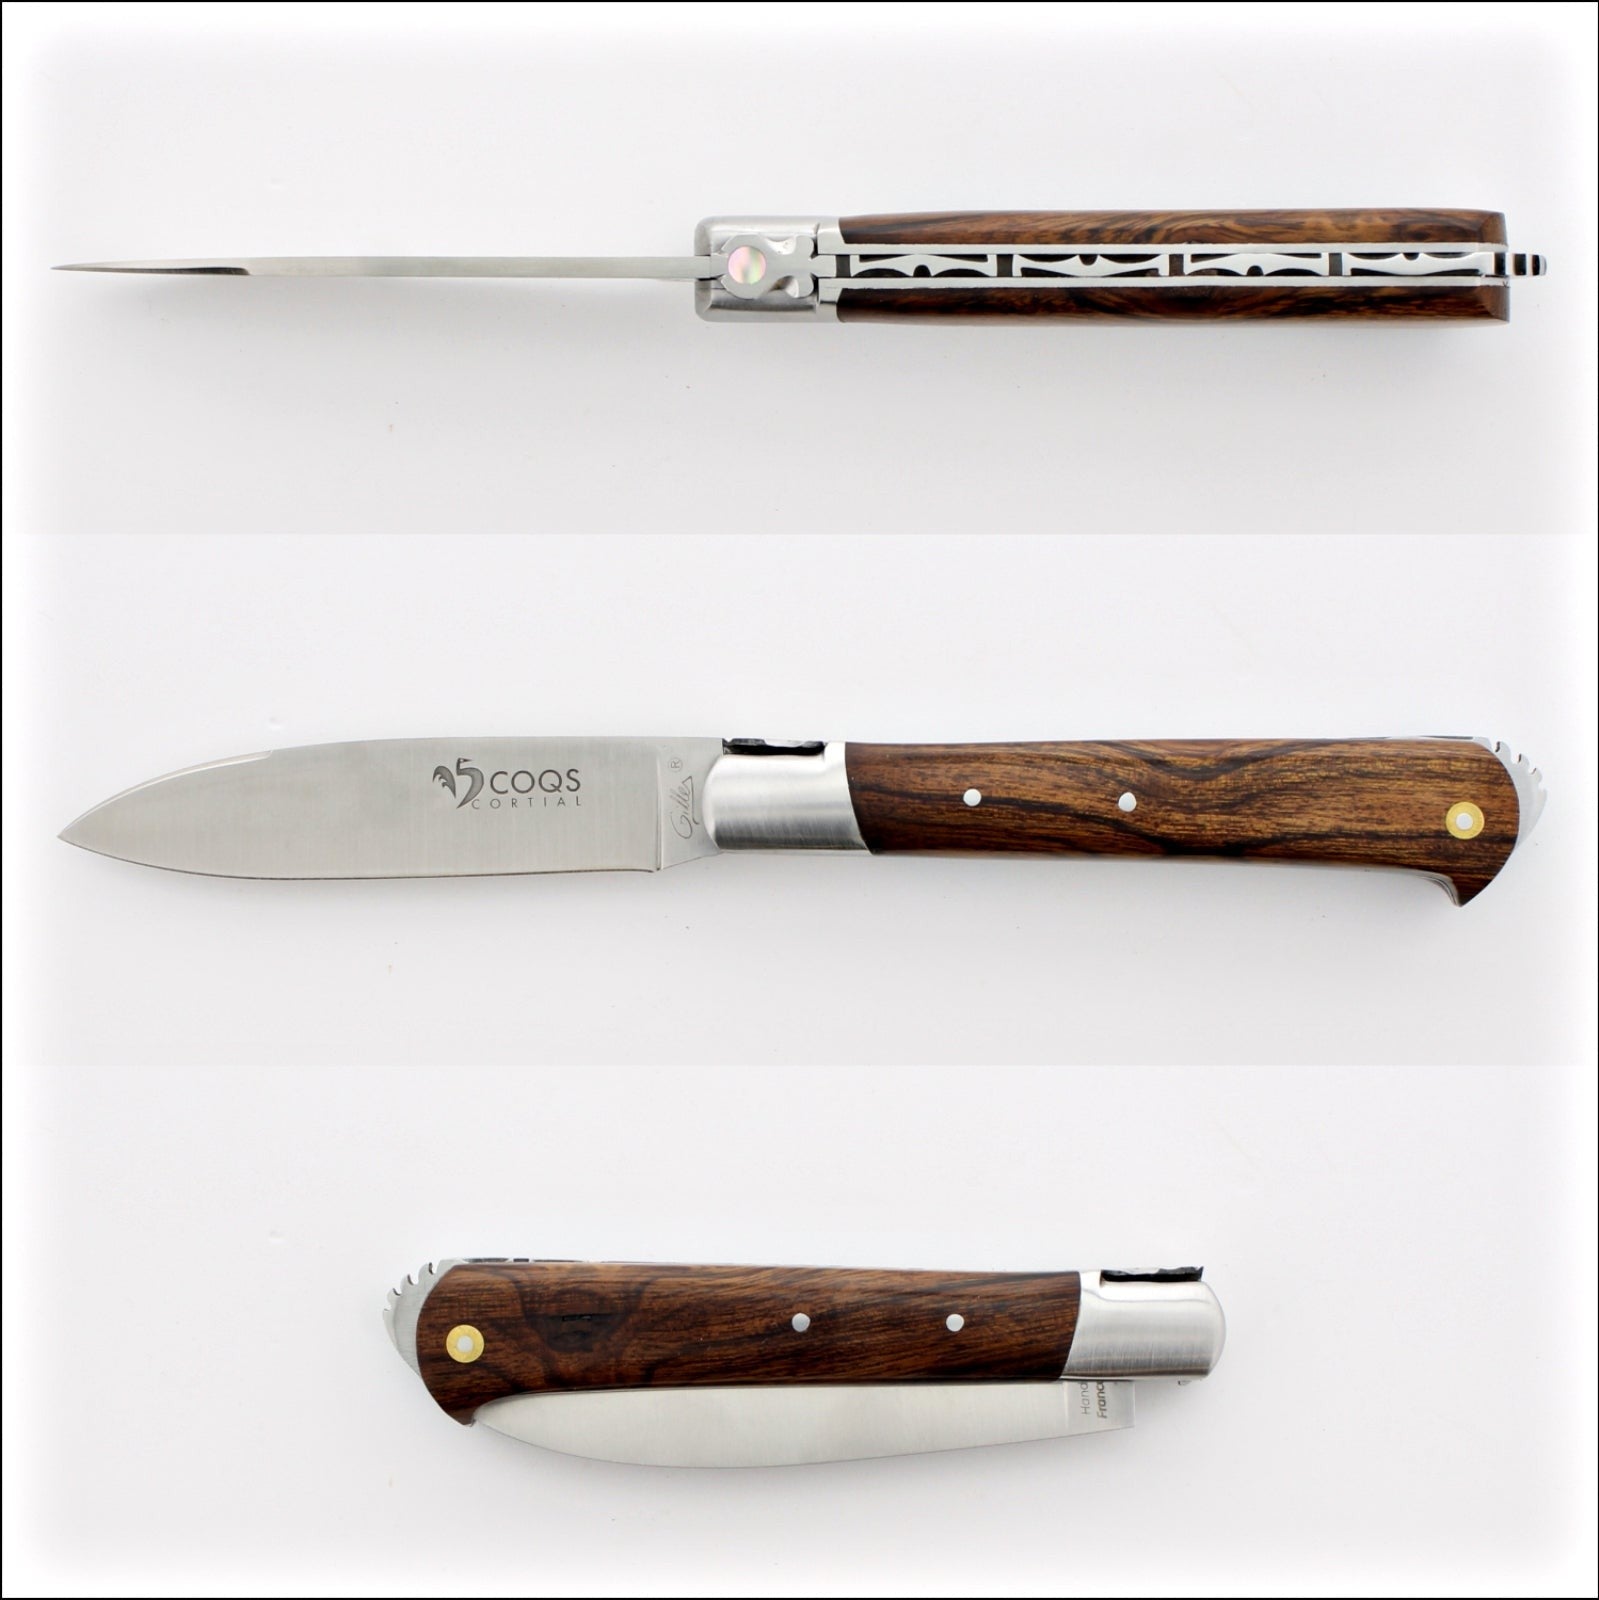 5 Coqs Pocket Knife - Desert Ironwood Handle & Mother of Pearl Inlay